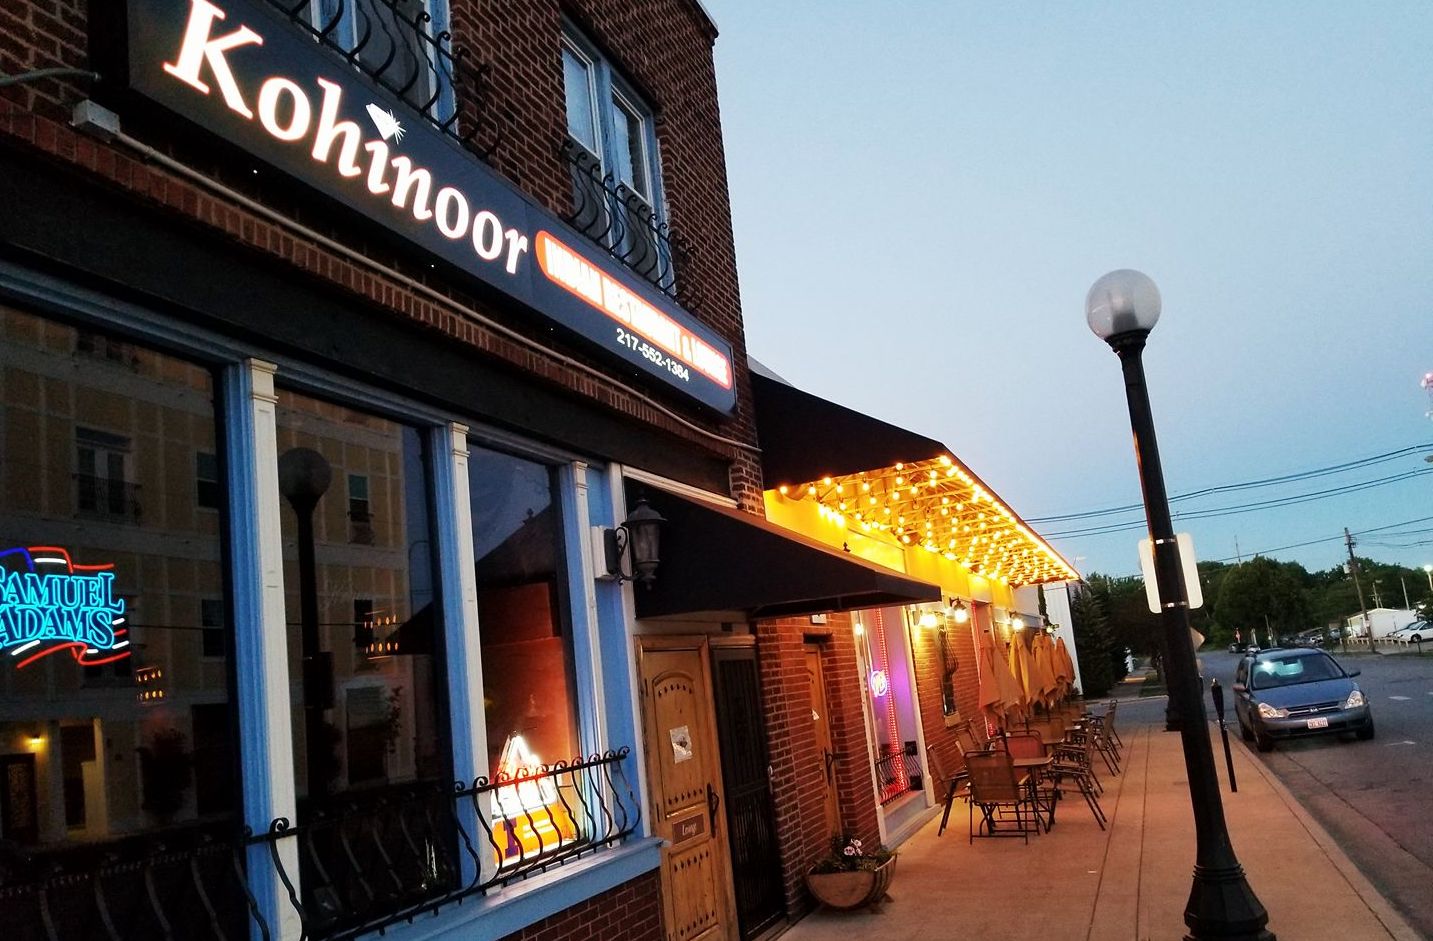 The outside of Kohinoor Indian restaurant at night. A large sign says Kohinoor above the door, next door there are white light strands hanging from the roof.